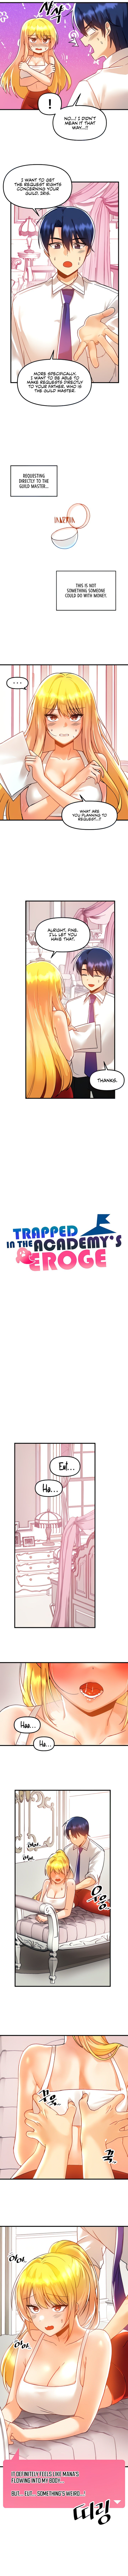 trapped-in-the-academys-eroge-chap-47-1